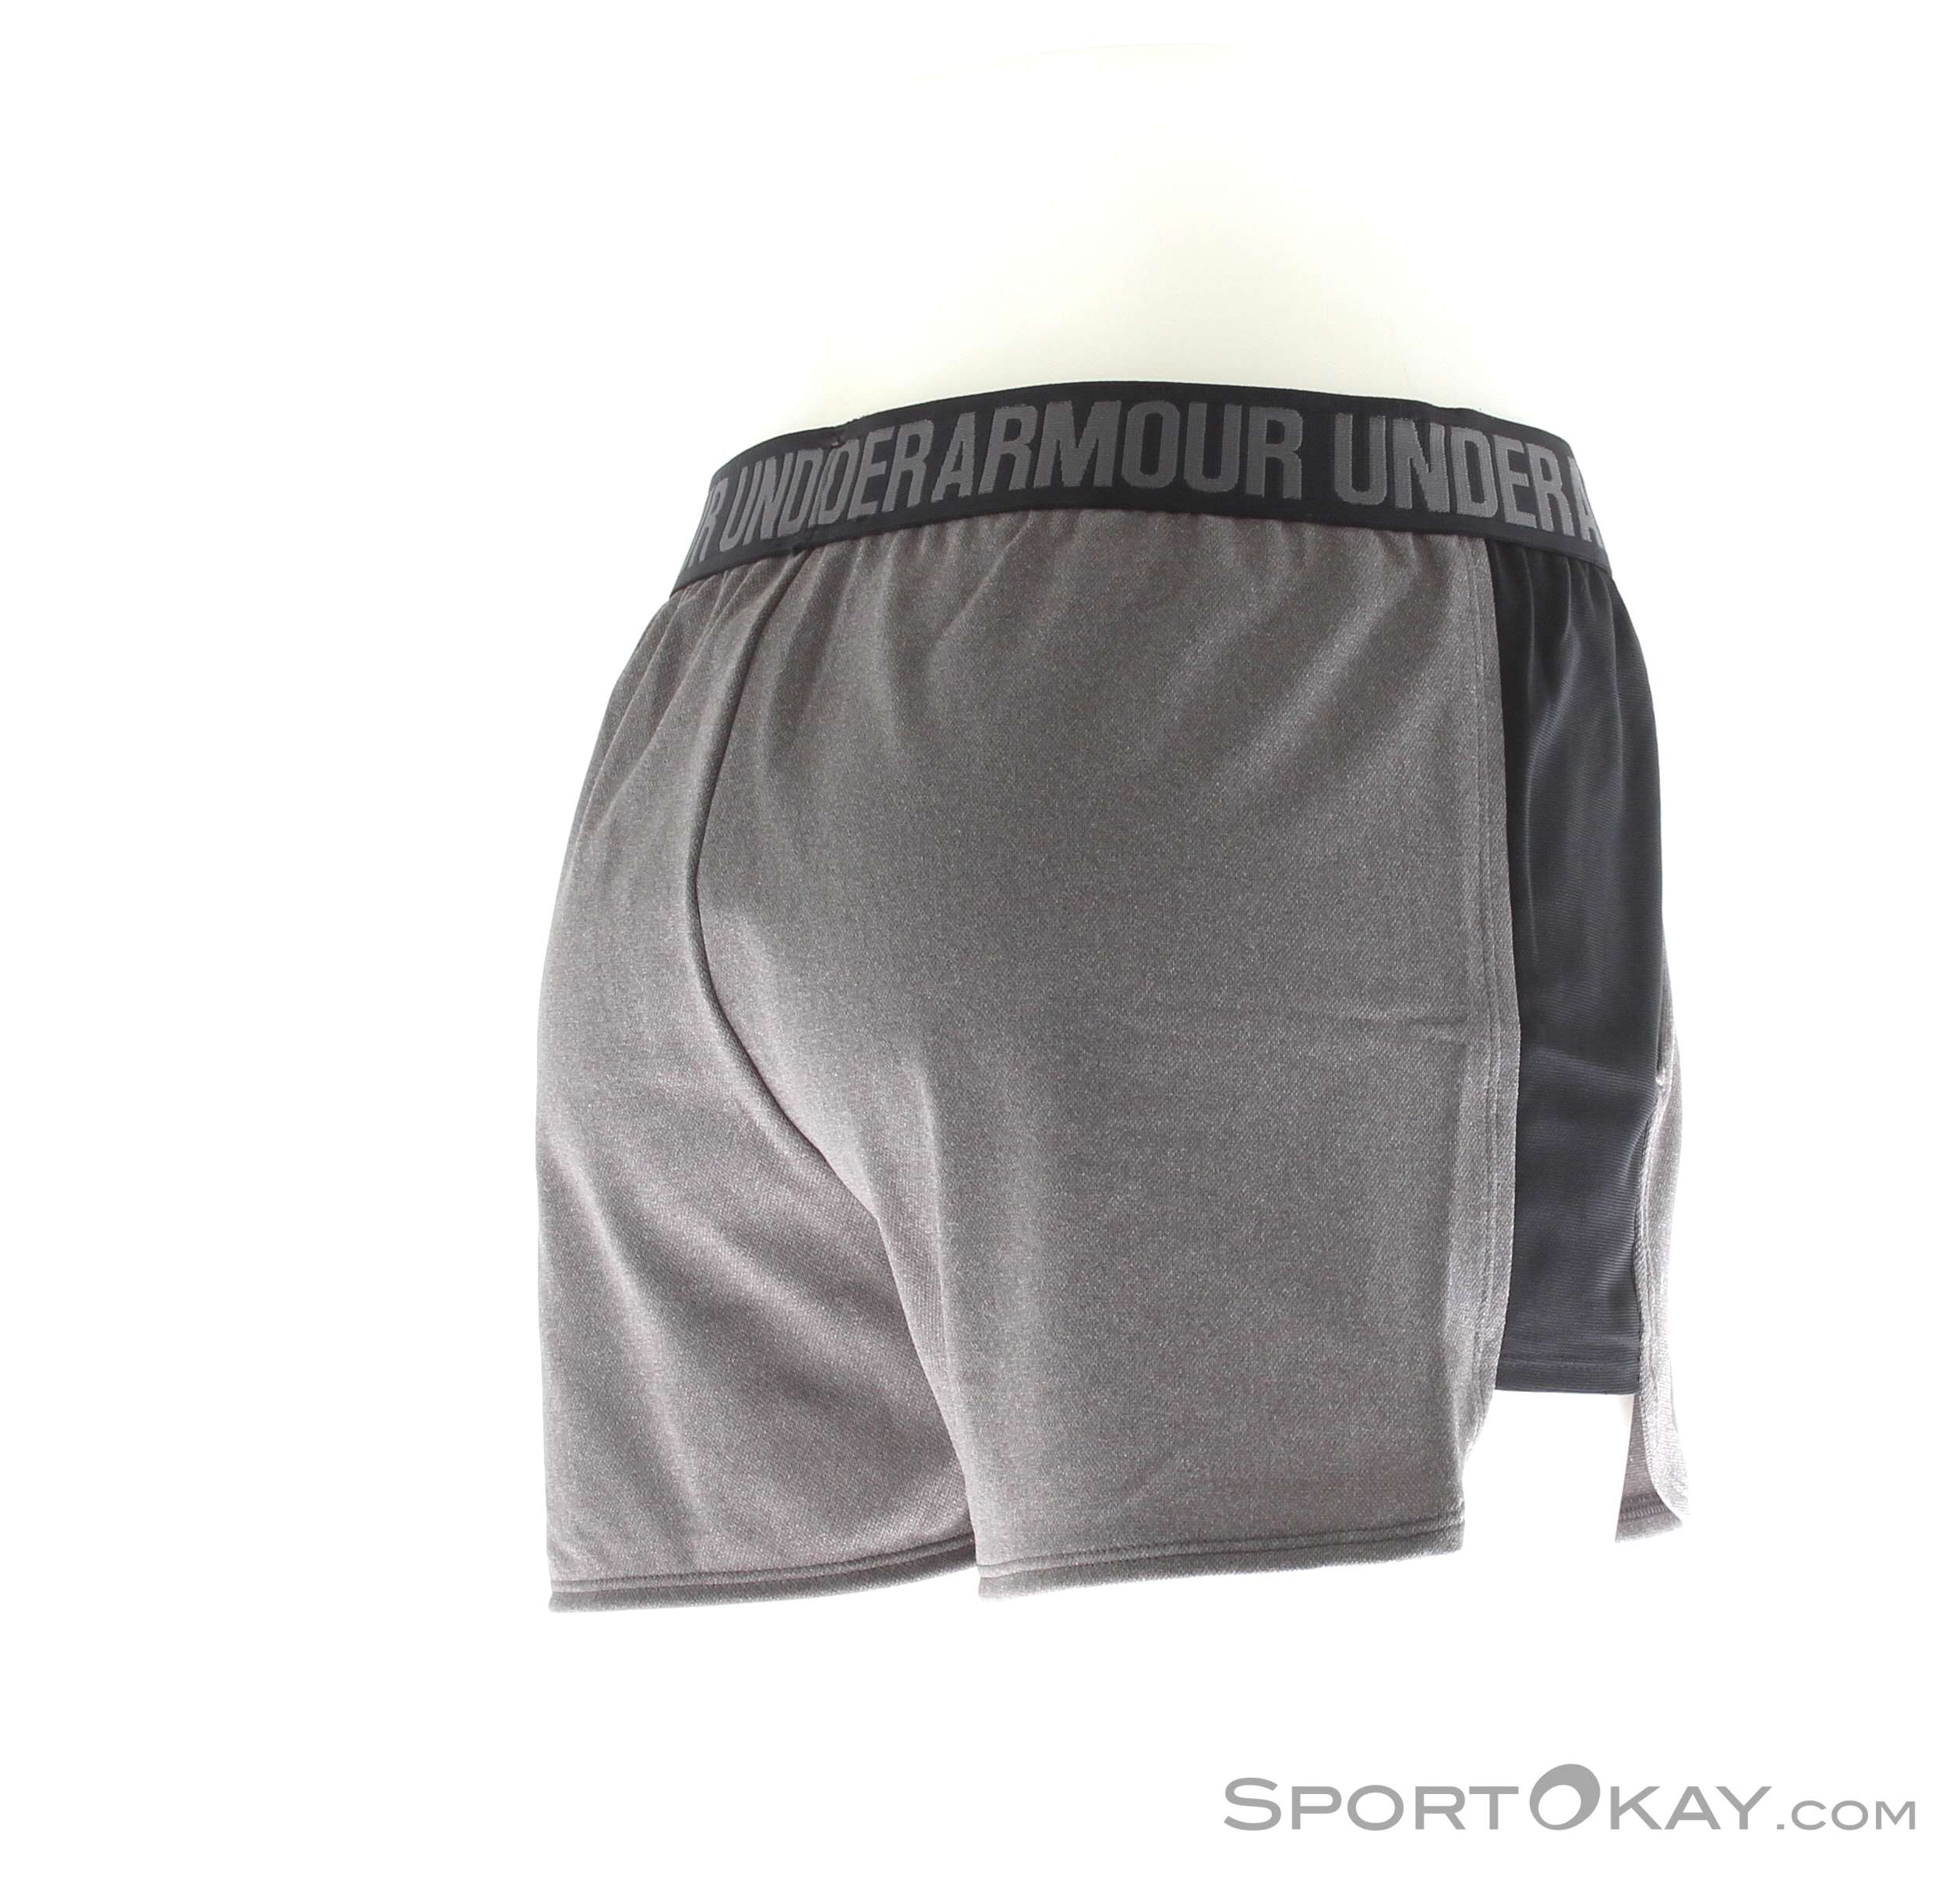 Under Armour Play Up 2.0 Shorts Womens Fitness Shorts - Pants